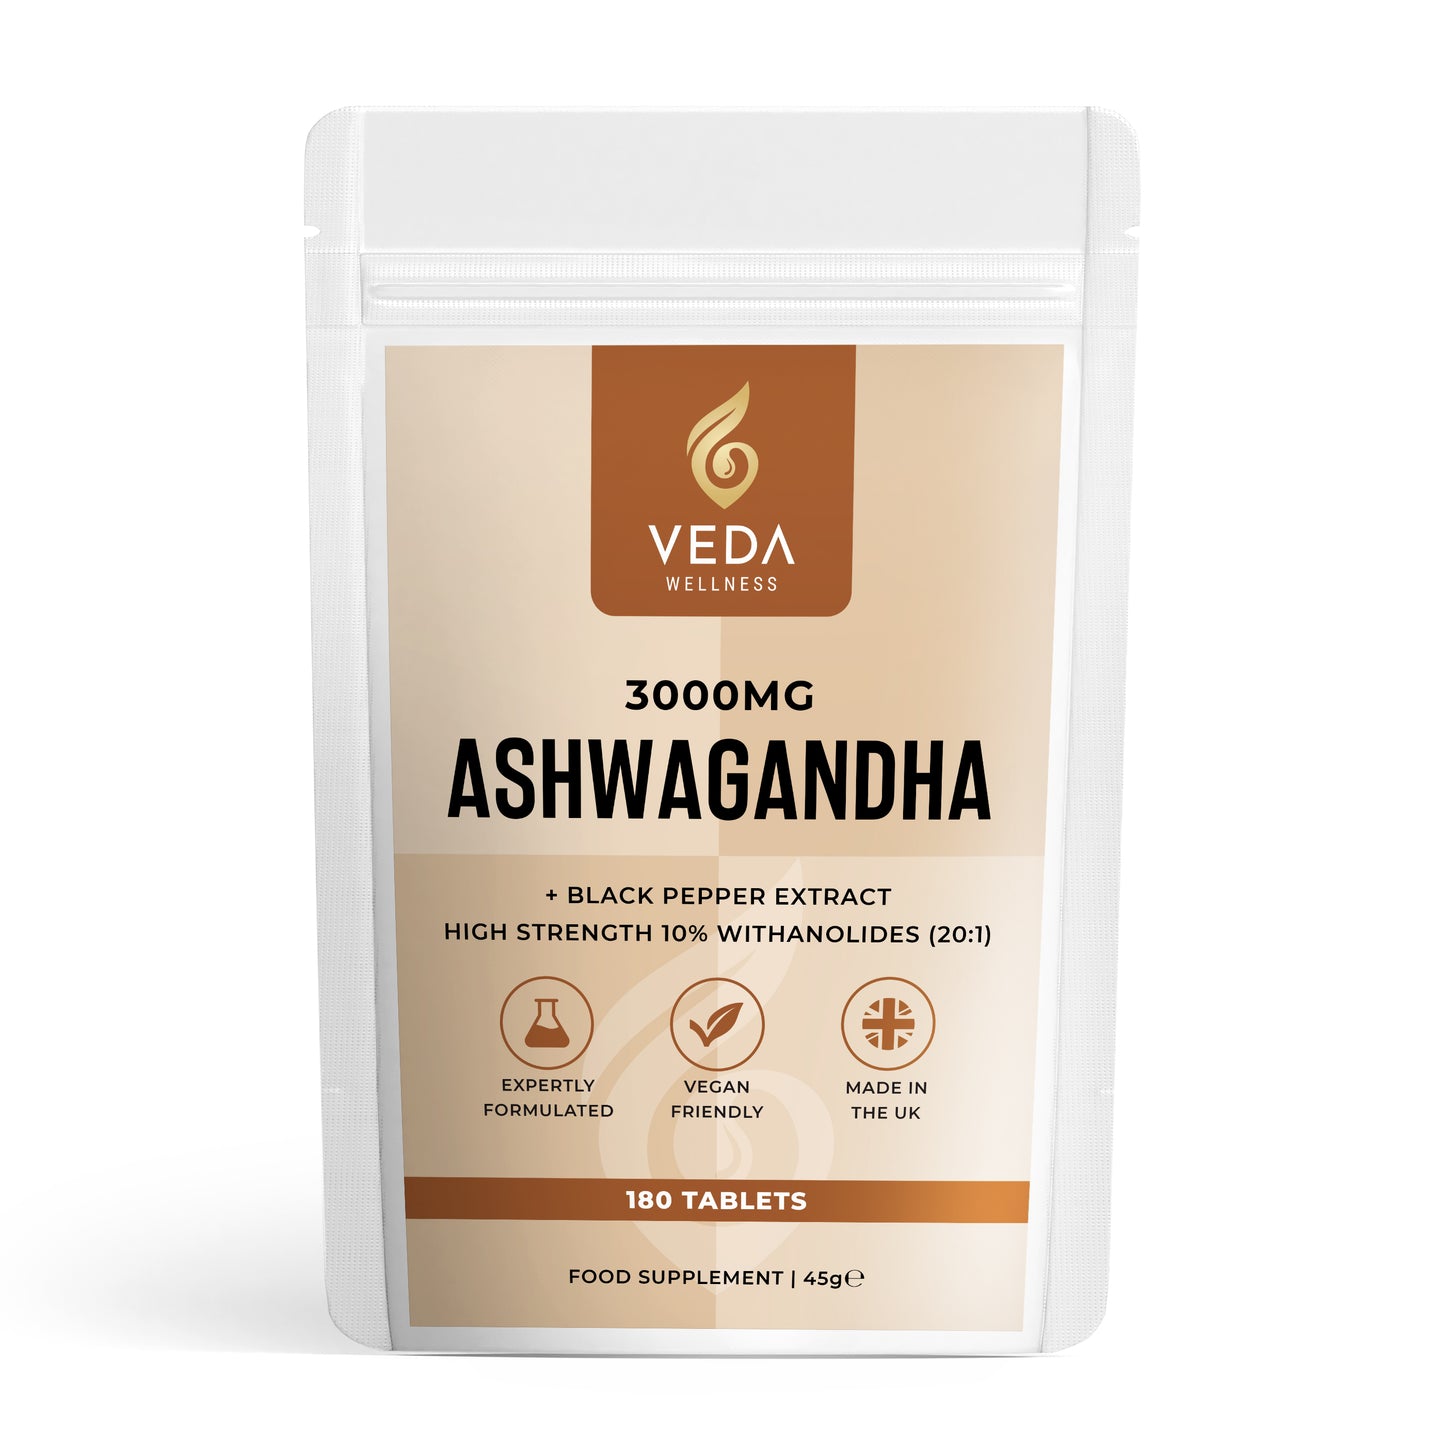 Pure Ashwagandha Extract 3000mg - 180 Vegan Tablets + Black Pepper. Made in UK.